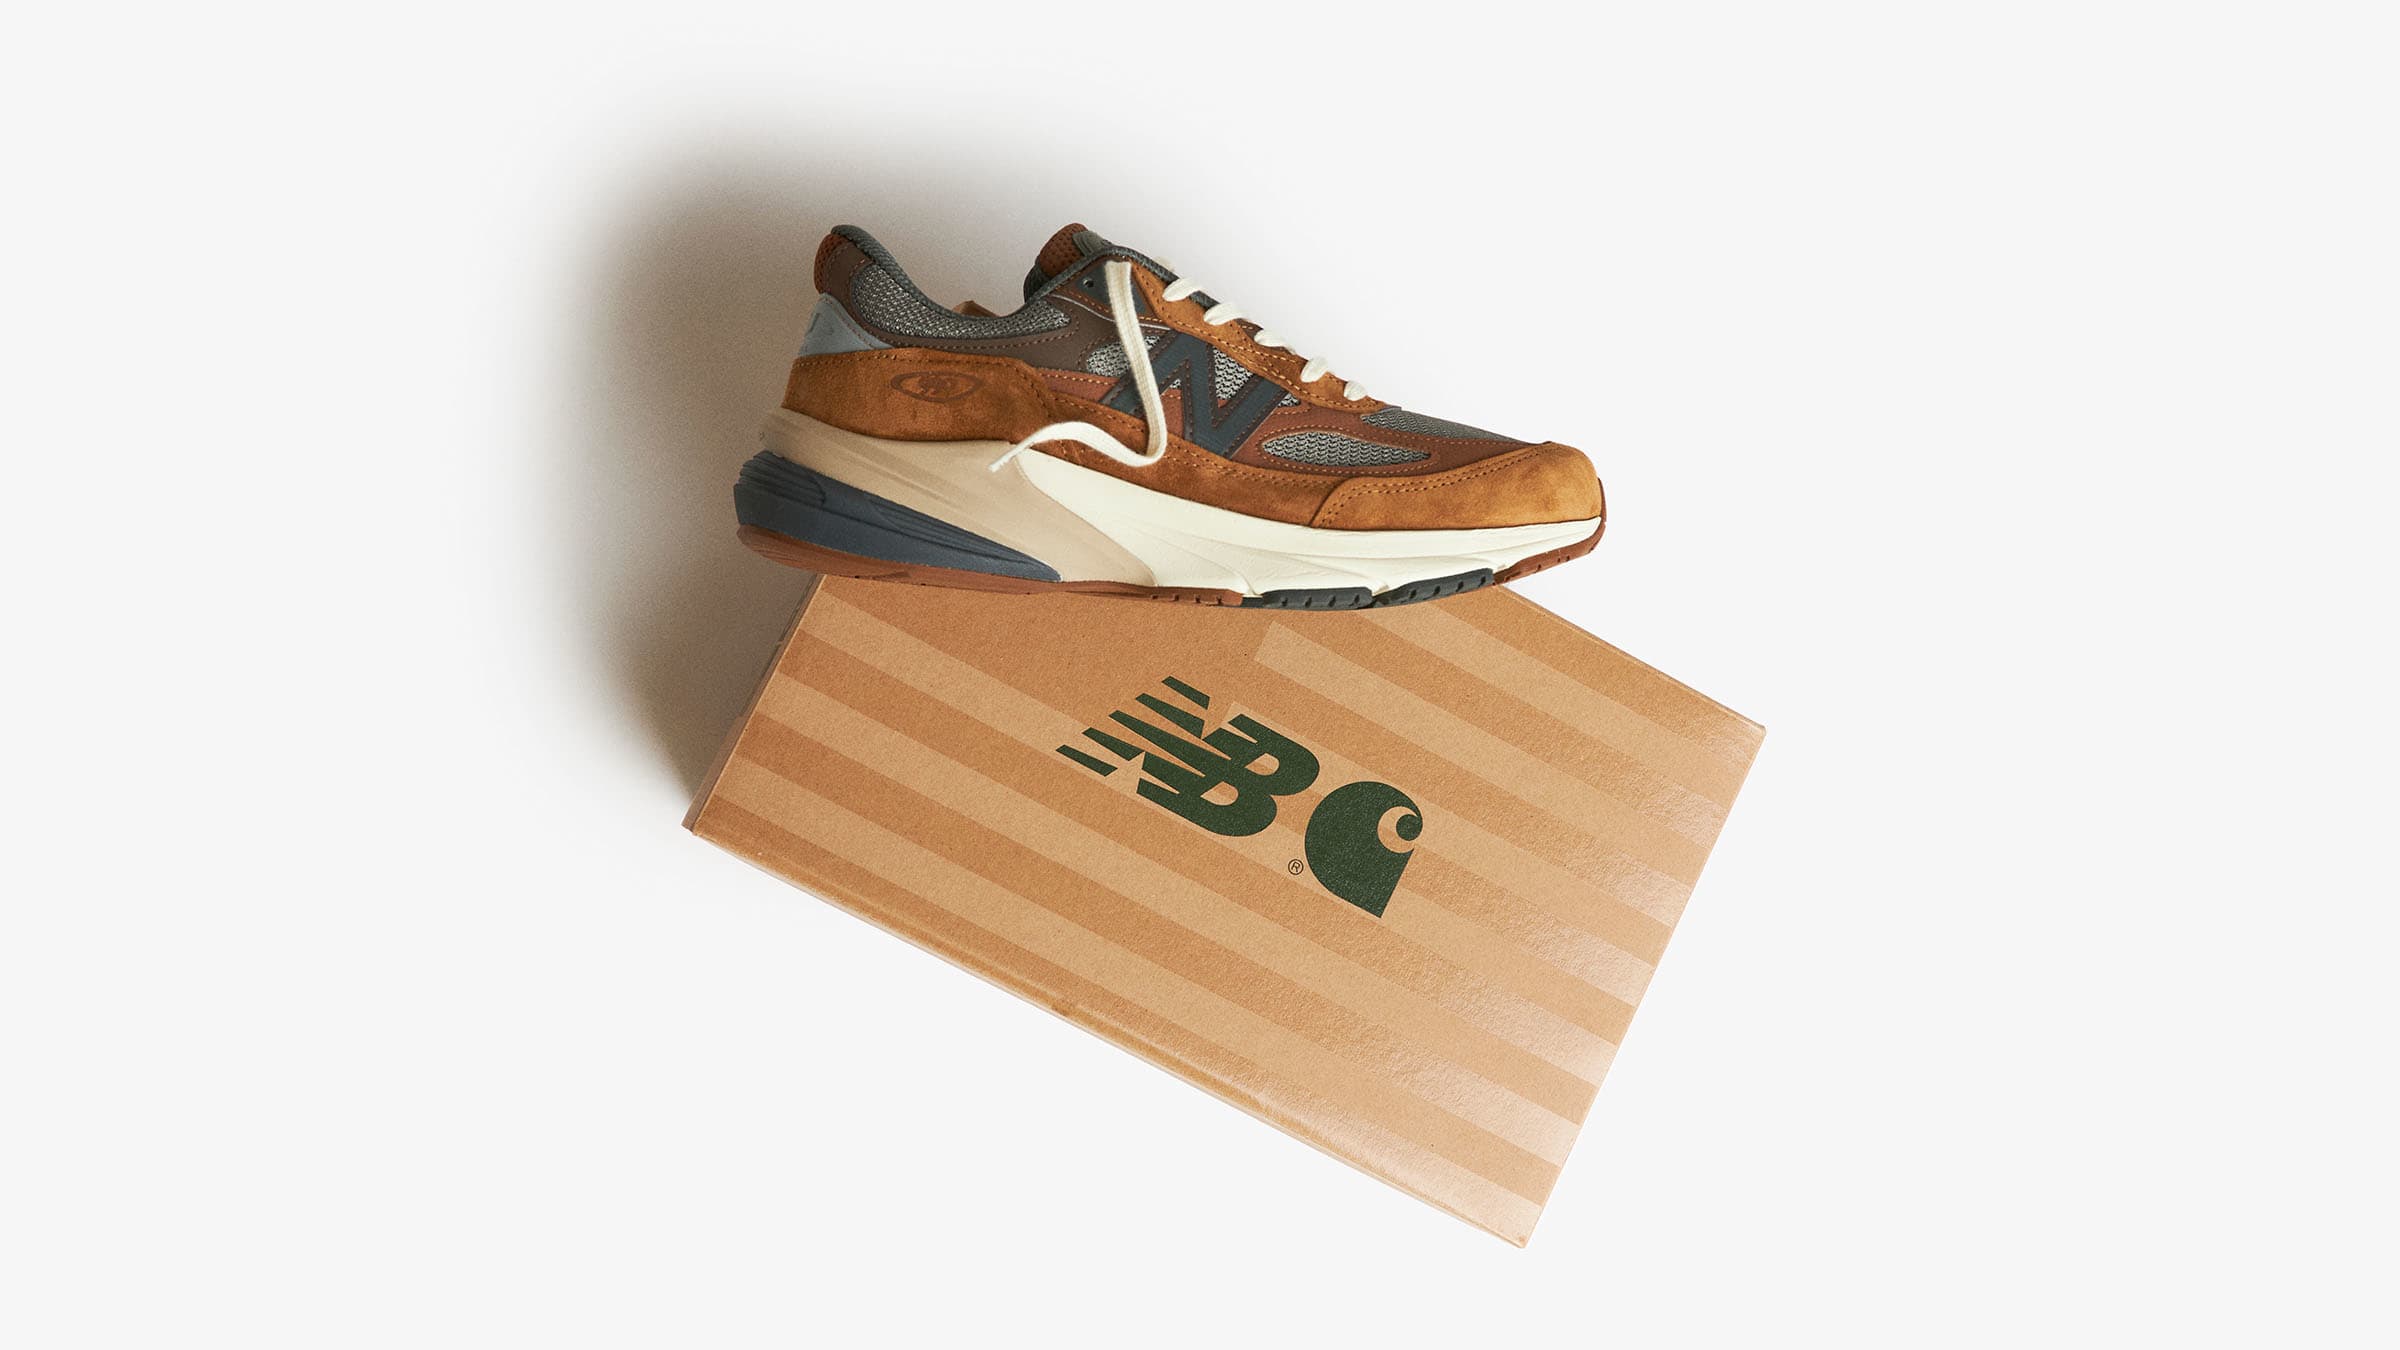 New Balance x Carhartt WIP 990 V6 (Workwear) | END. Launches